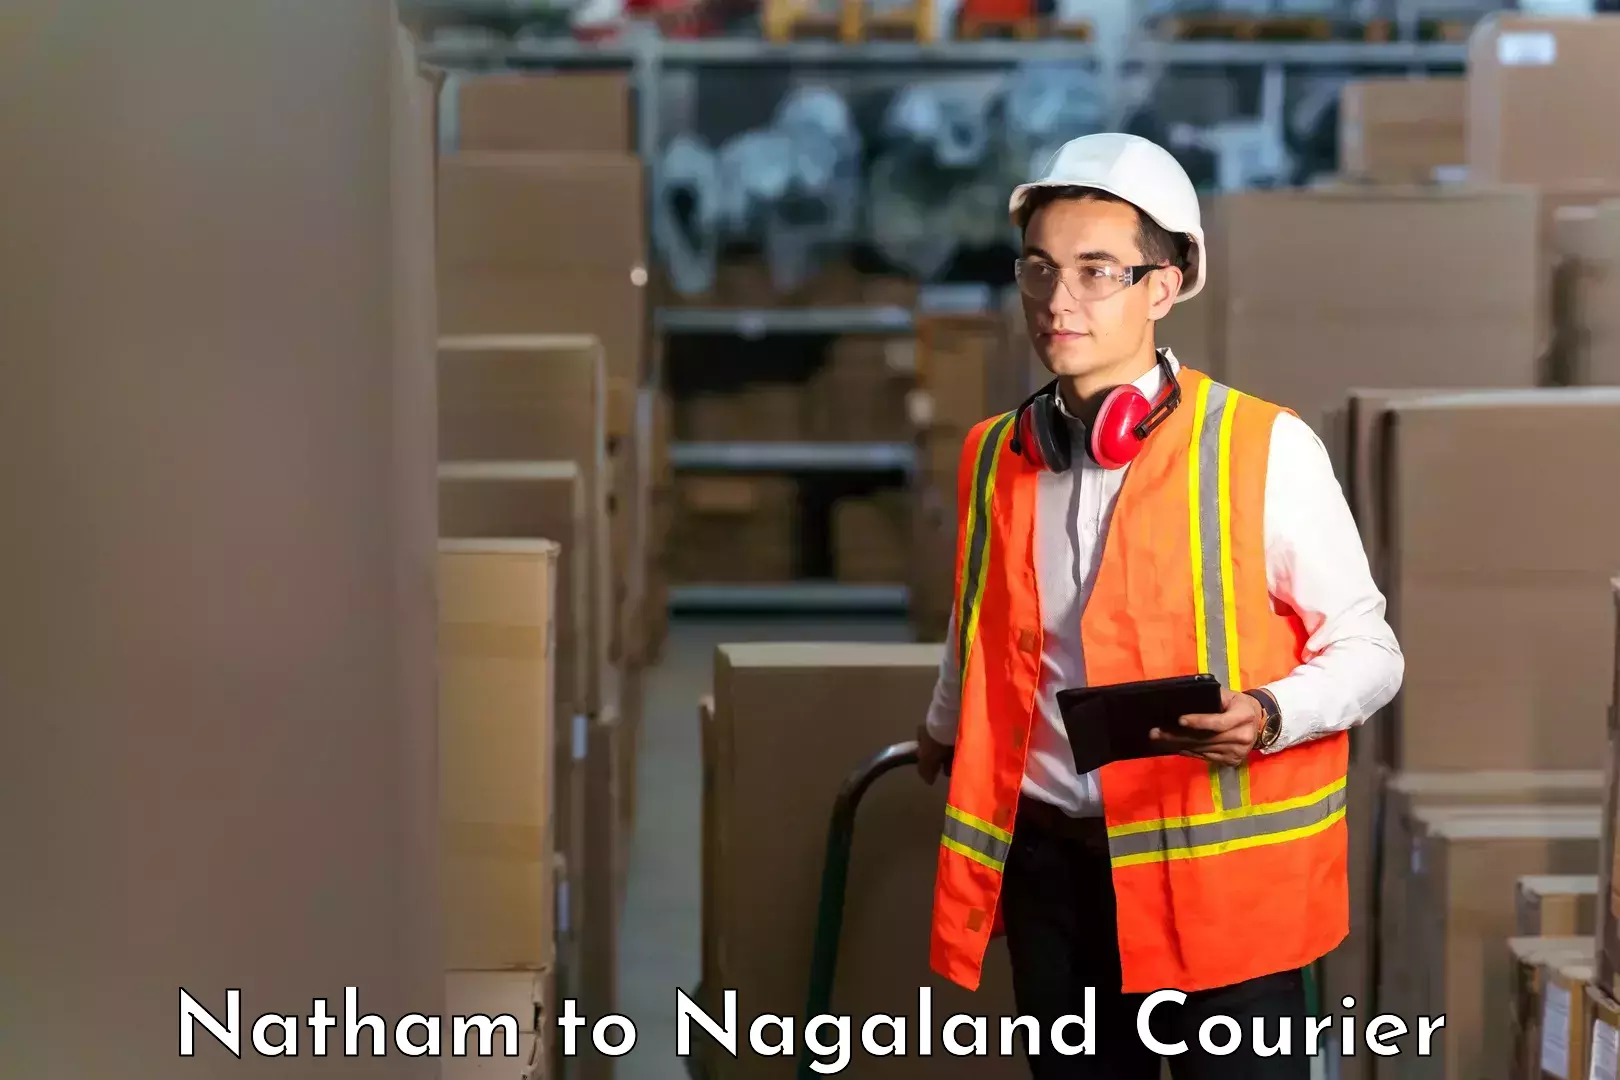 Flexible delivery schedules Natham to Nagaland